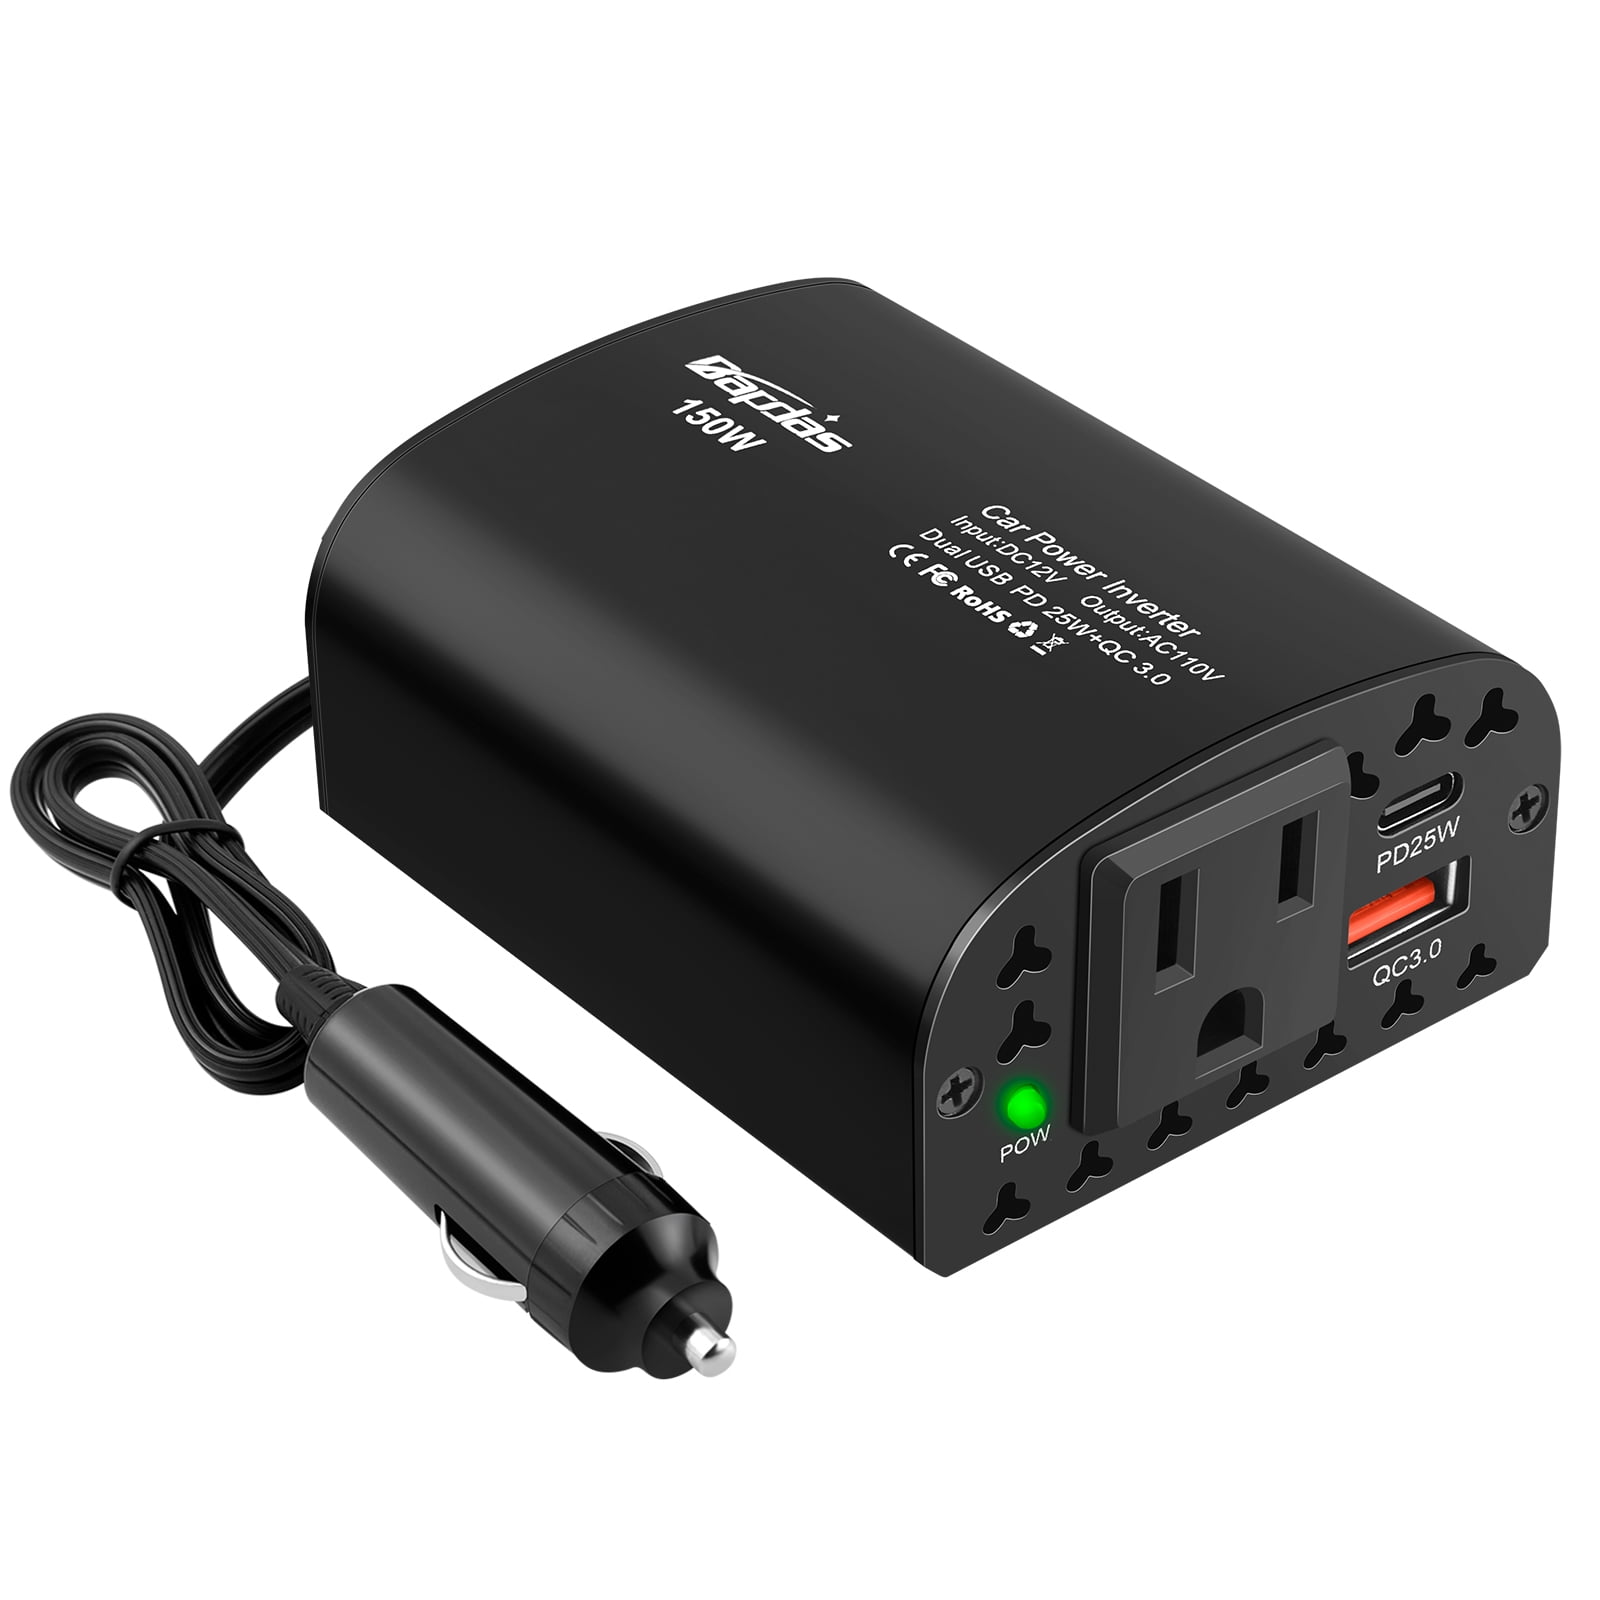  FOVAL 150W Car Power Inverter 12V DC to 110V AC Converter Vehicle  Adapter Plug Outlet with 3.1A Dual USB Car Charger for Laptop Computer Red  : Automotive